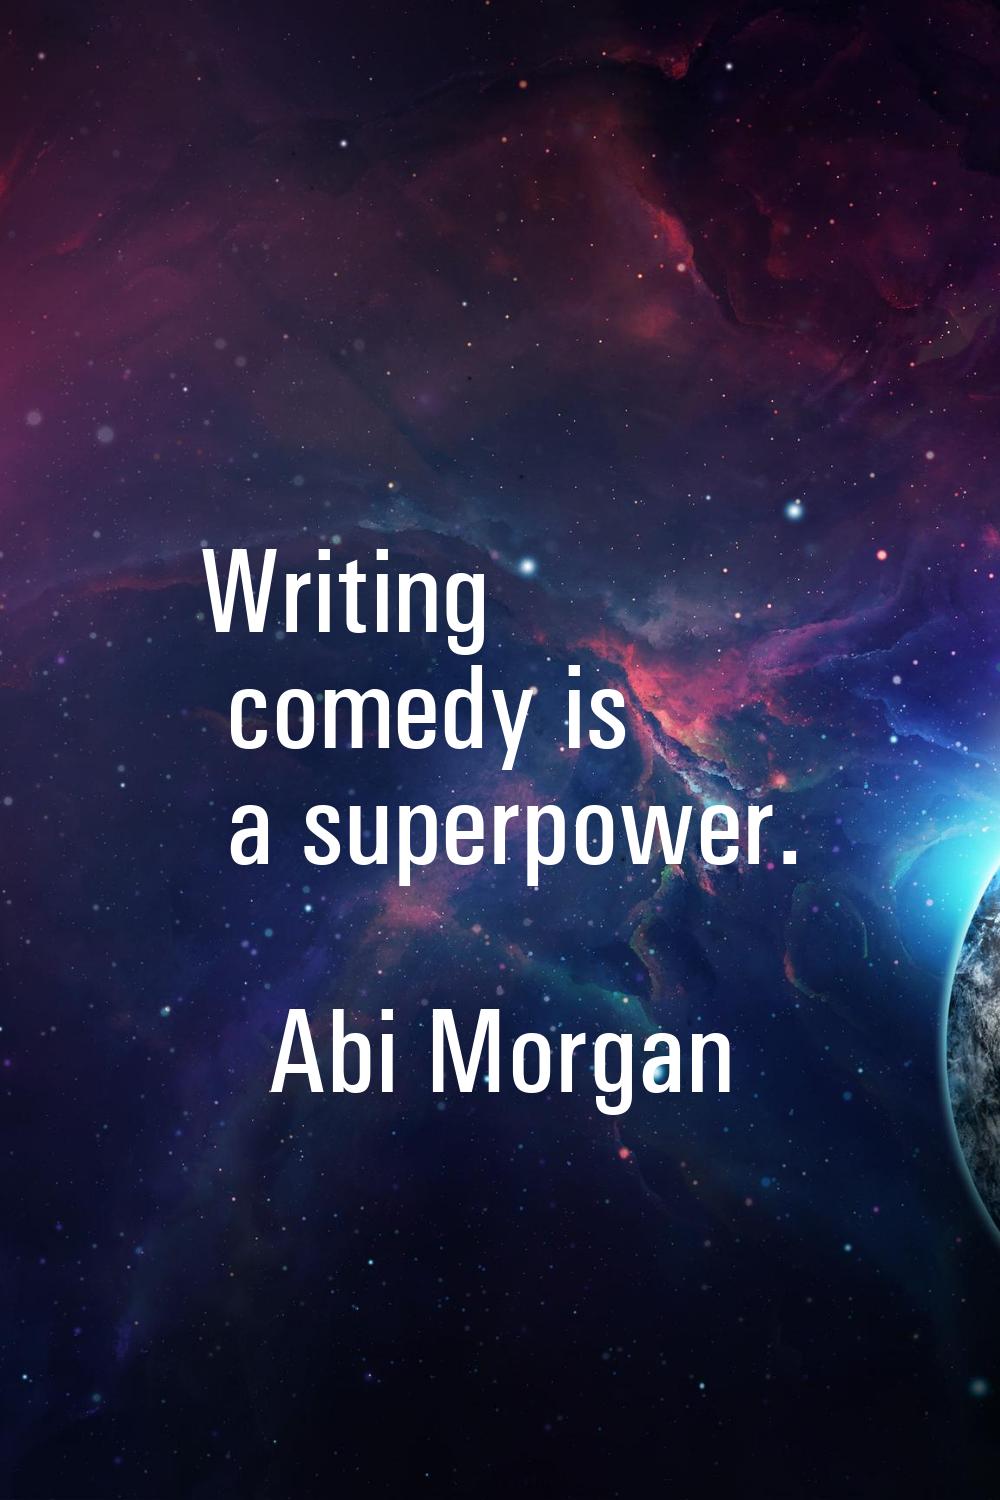 Writing comedy is a superpower.